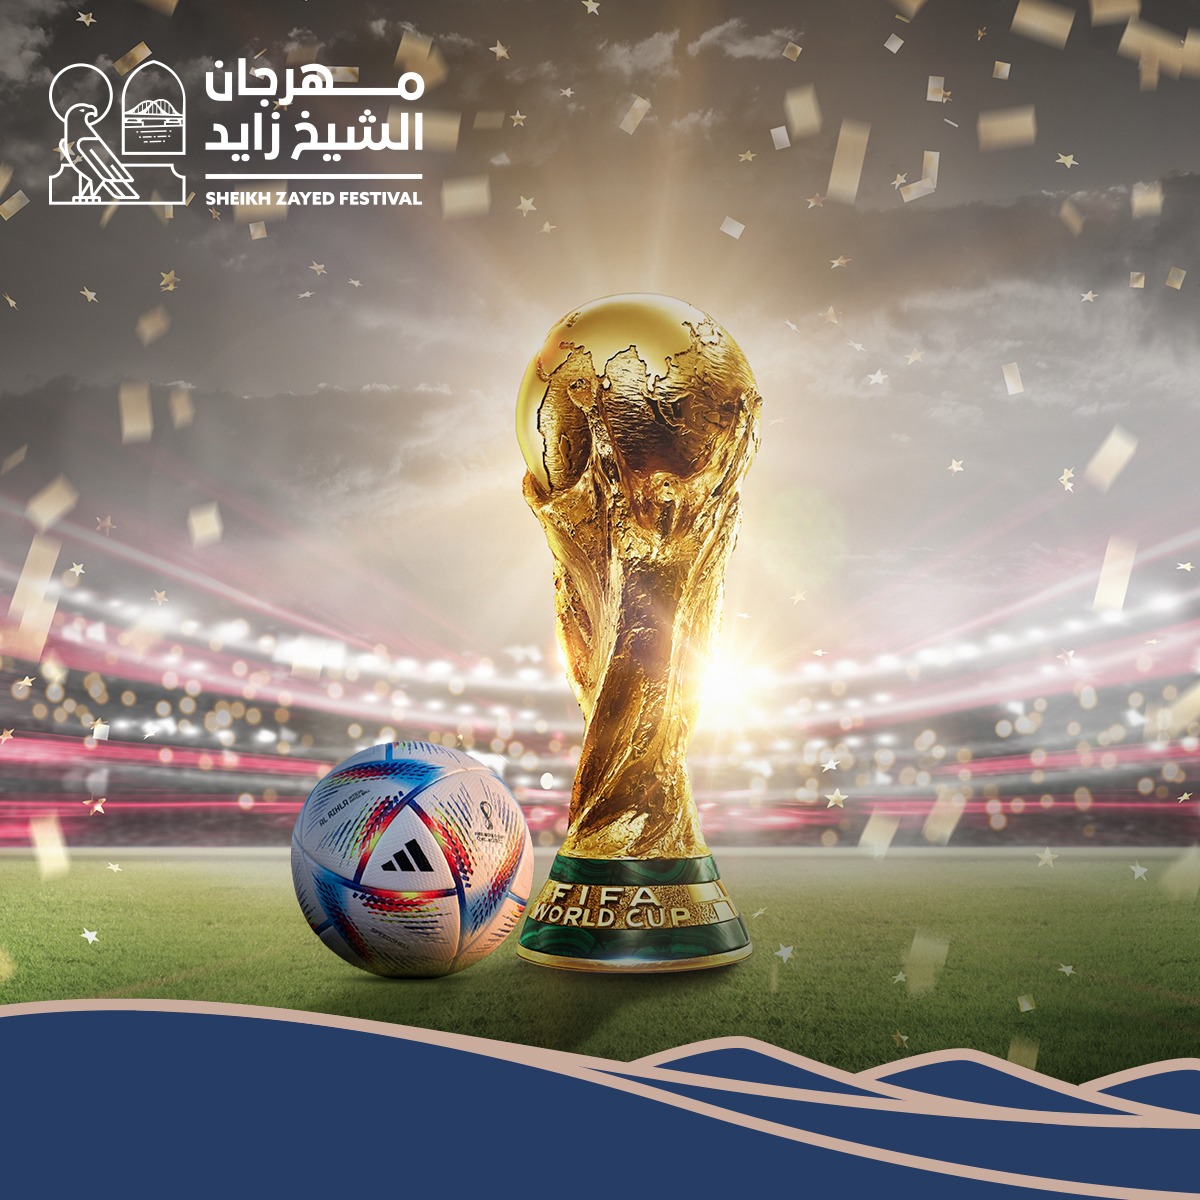 FIFA World Cup Fans Can Enjoy An Amazing Experience At Sheikh Zayed Festival